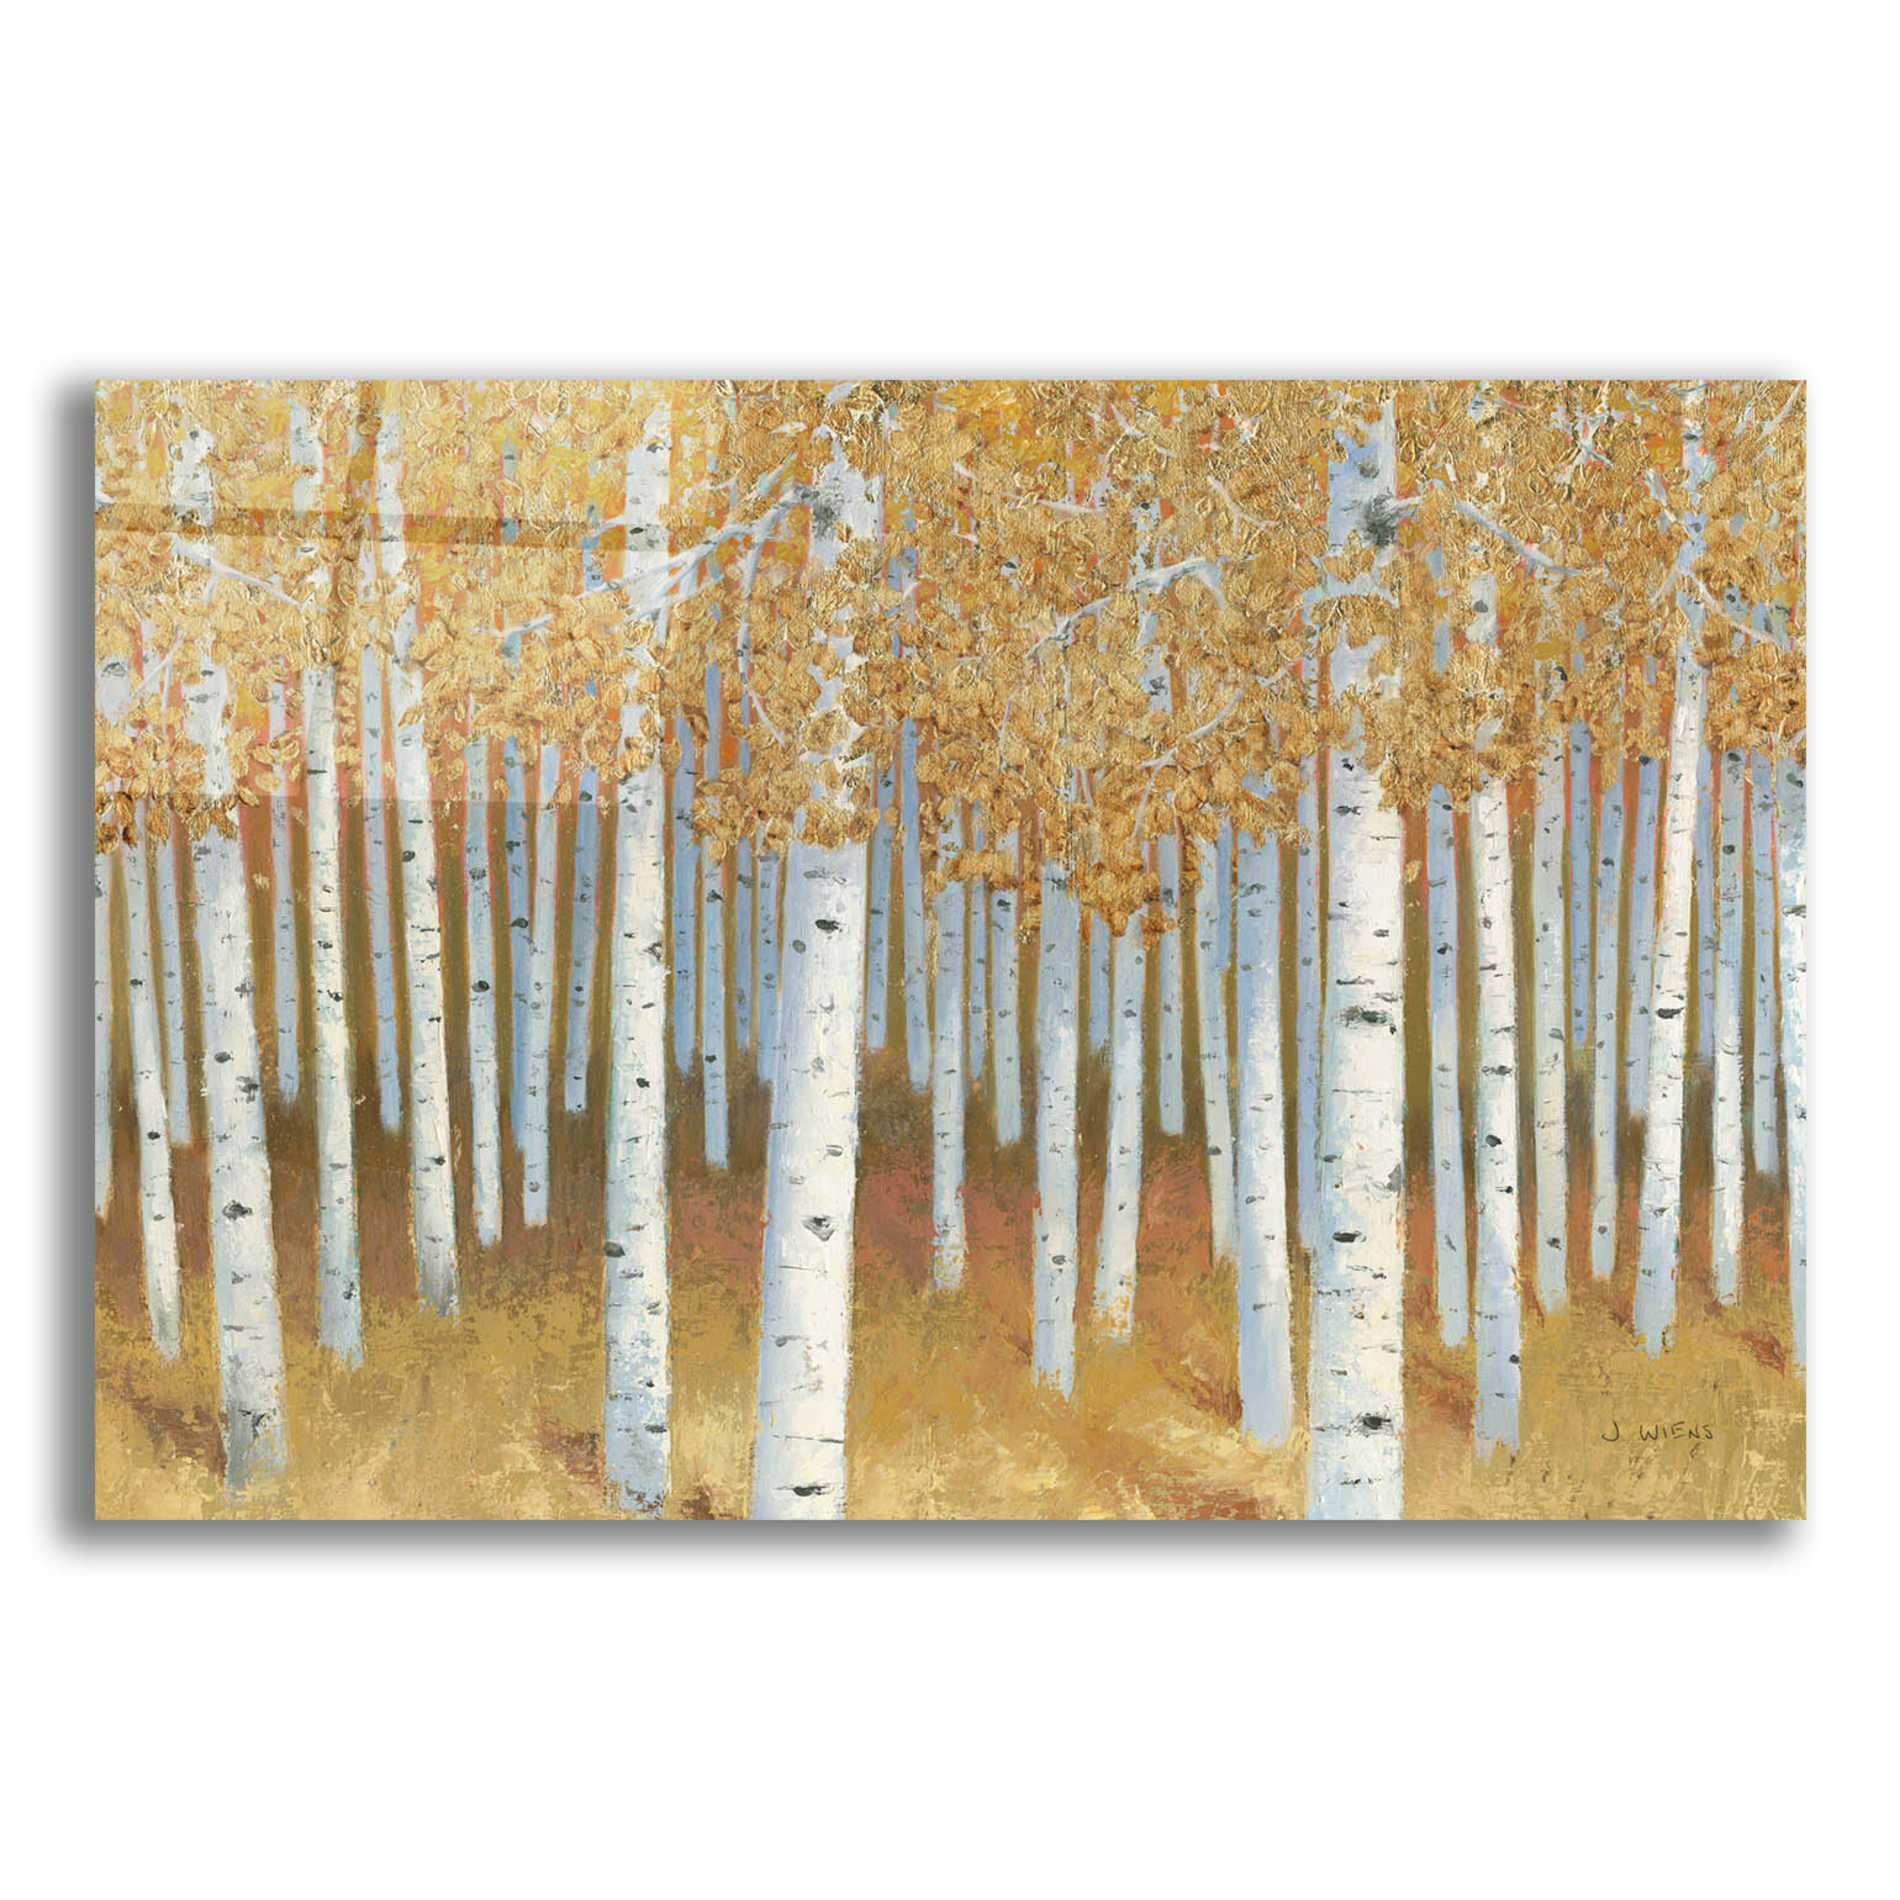 Epic Art 'Forest of Gold' by James Wiens, Acrylic Glass Wall Art,18x12x1.1x0,26x18x1.1x0,40x26x1.74x0,60x40x1.74x0